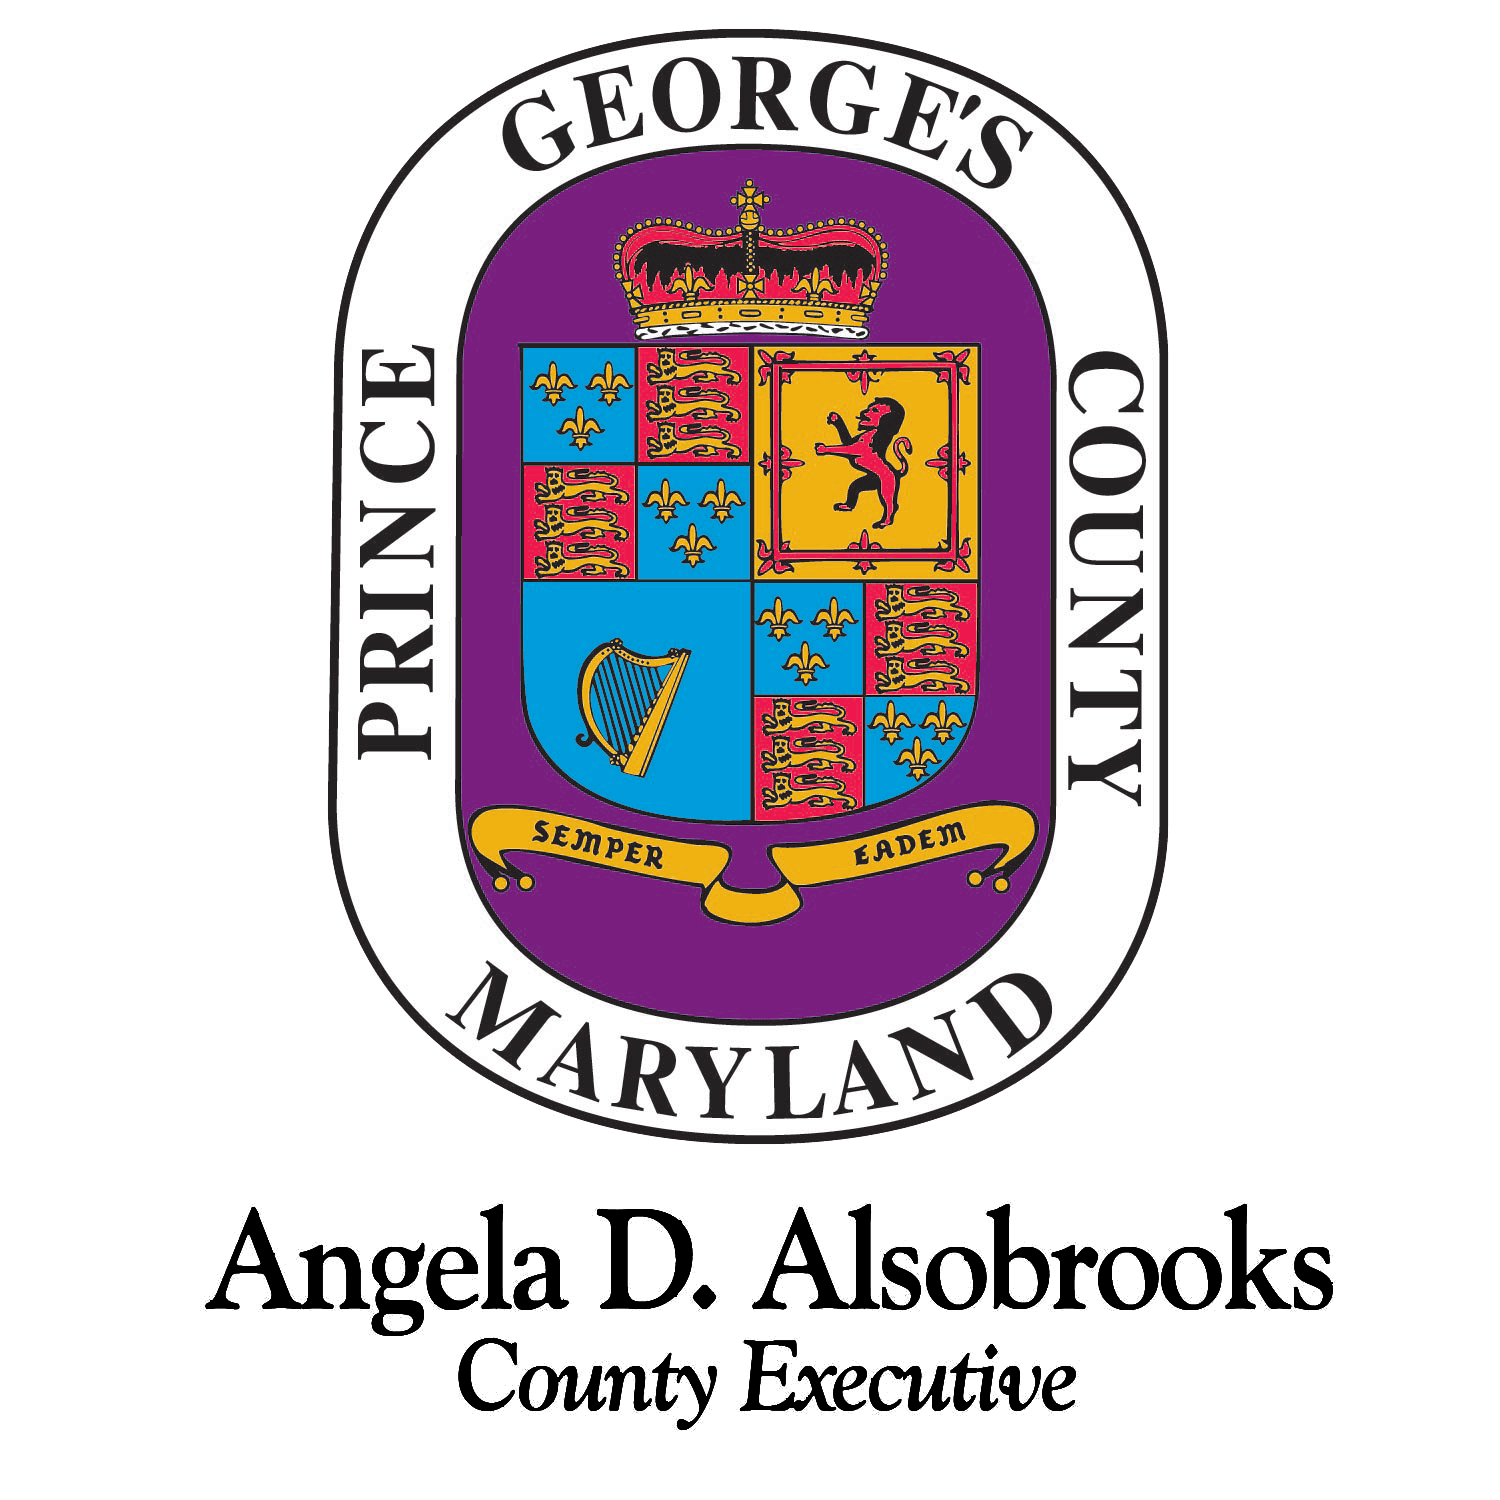 Prince George's County, MD - County Executive Angela D. Alsobrooks